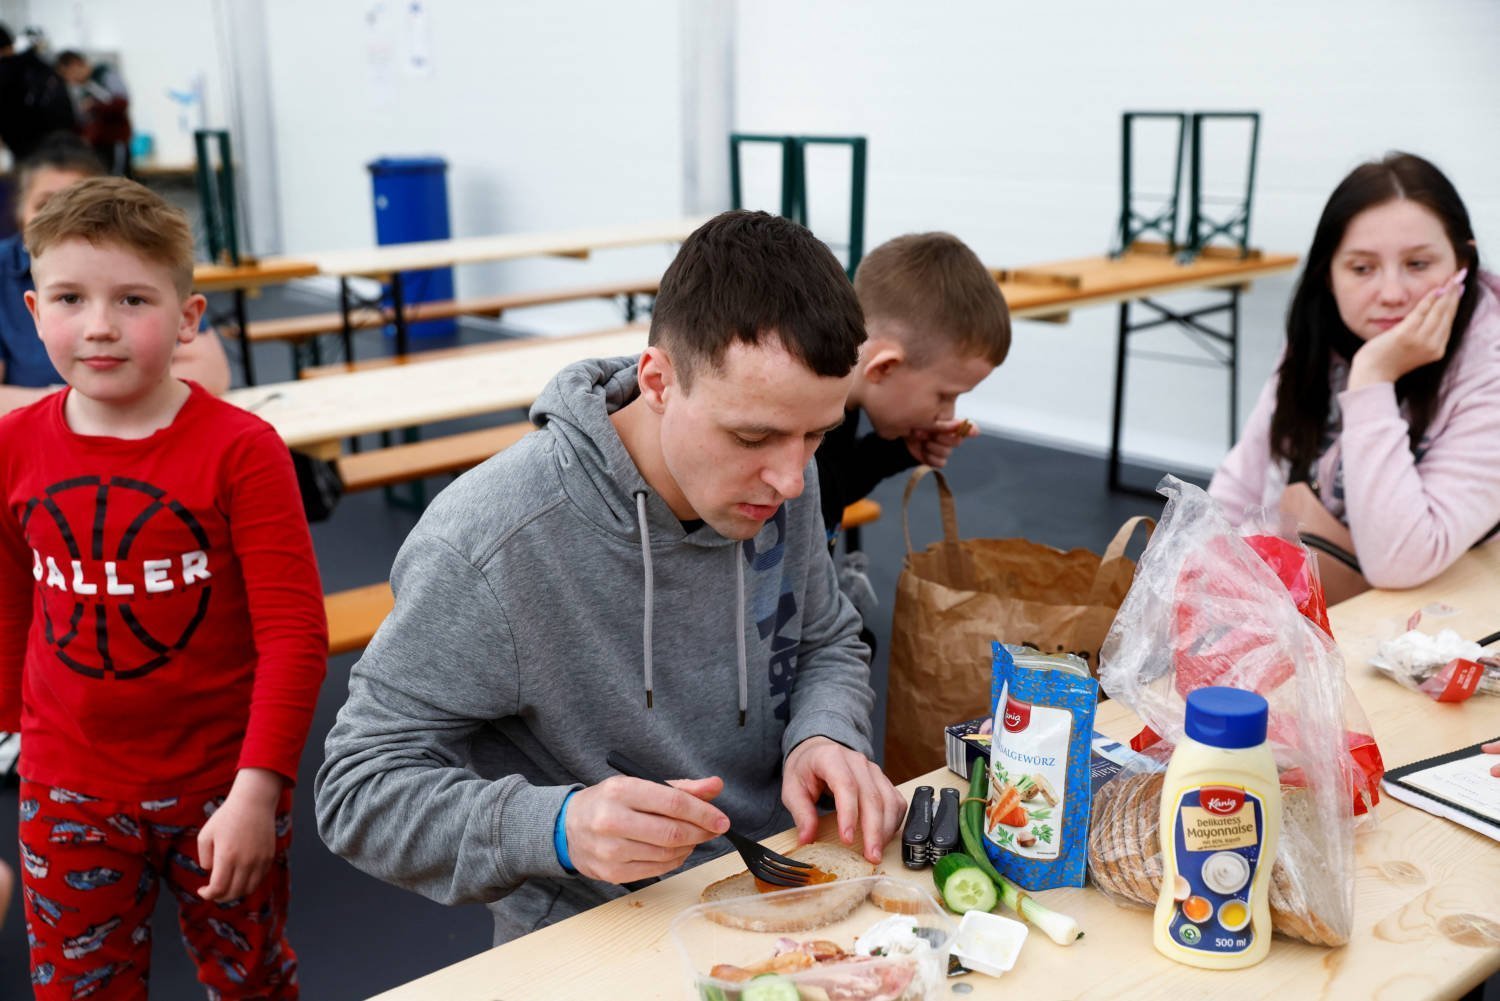 Evgeniy And Anna From Ukraine Prepare A Snack For Their Children At The Accommodation Centre For Refugees From Ukraine In Berlin